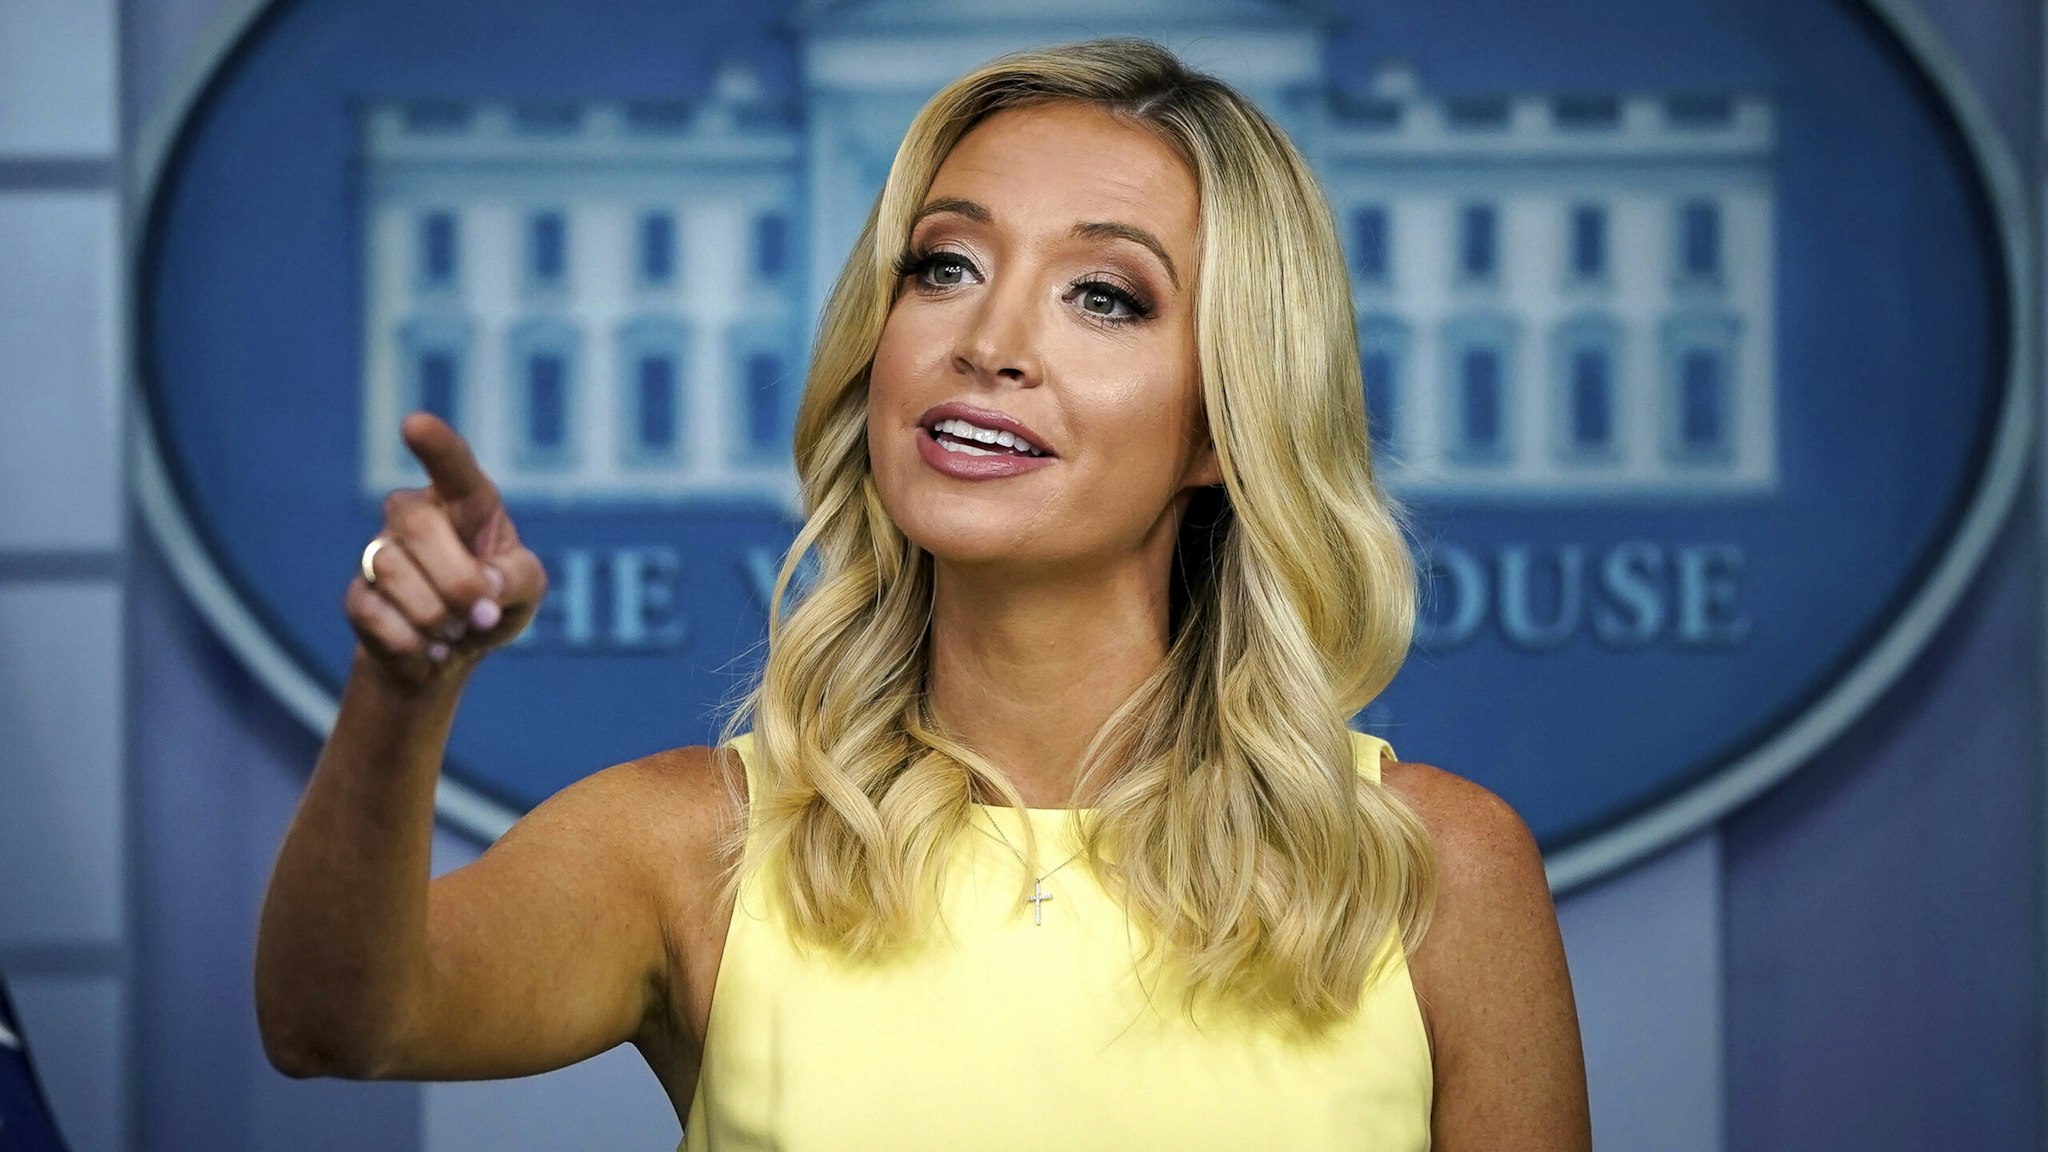 WASHINGTON, DC - JULY 16: White House Press Secretary Kayleigh McEnany speaks during a press briefing at the White House on July 16, 2020 in Washington, DC. On Thursday afternoon, President Trump will deliver remarks about rolling back regulations for businesses and infrastructure projects.